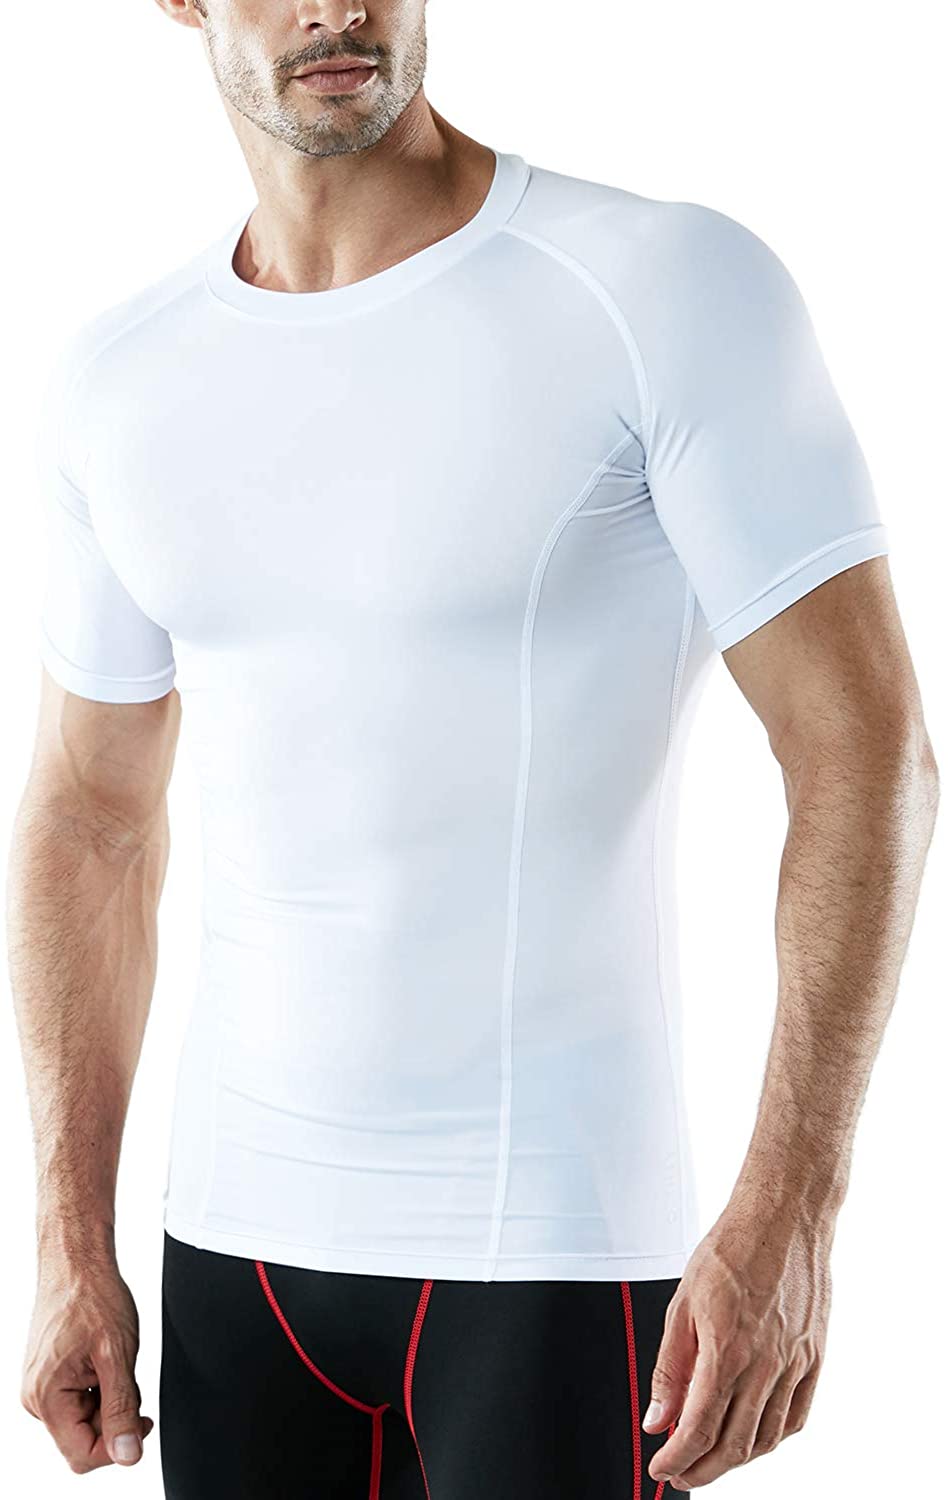 ATHLIO 1 or 3 Pack Men's Cool Dry Short Sleeve Compression Shirts ...